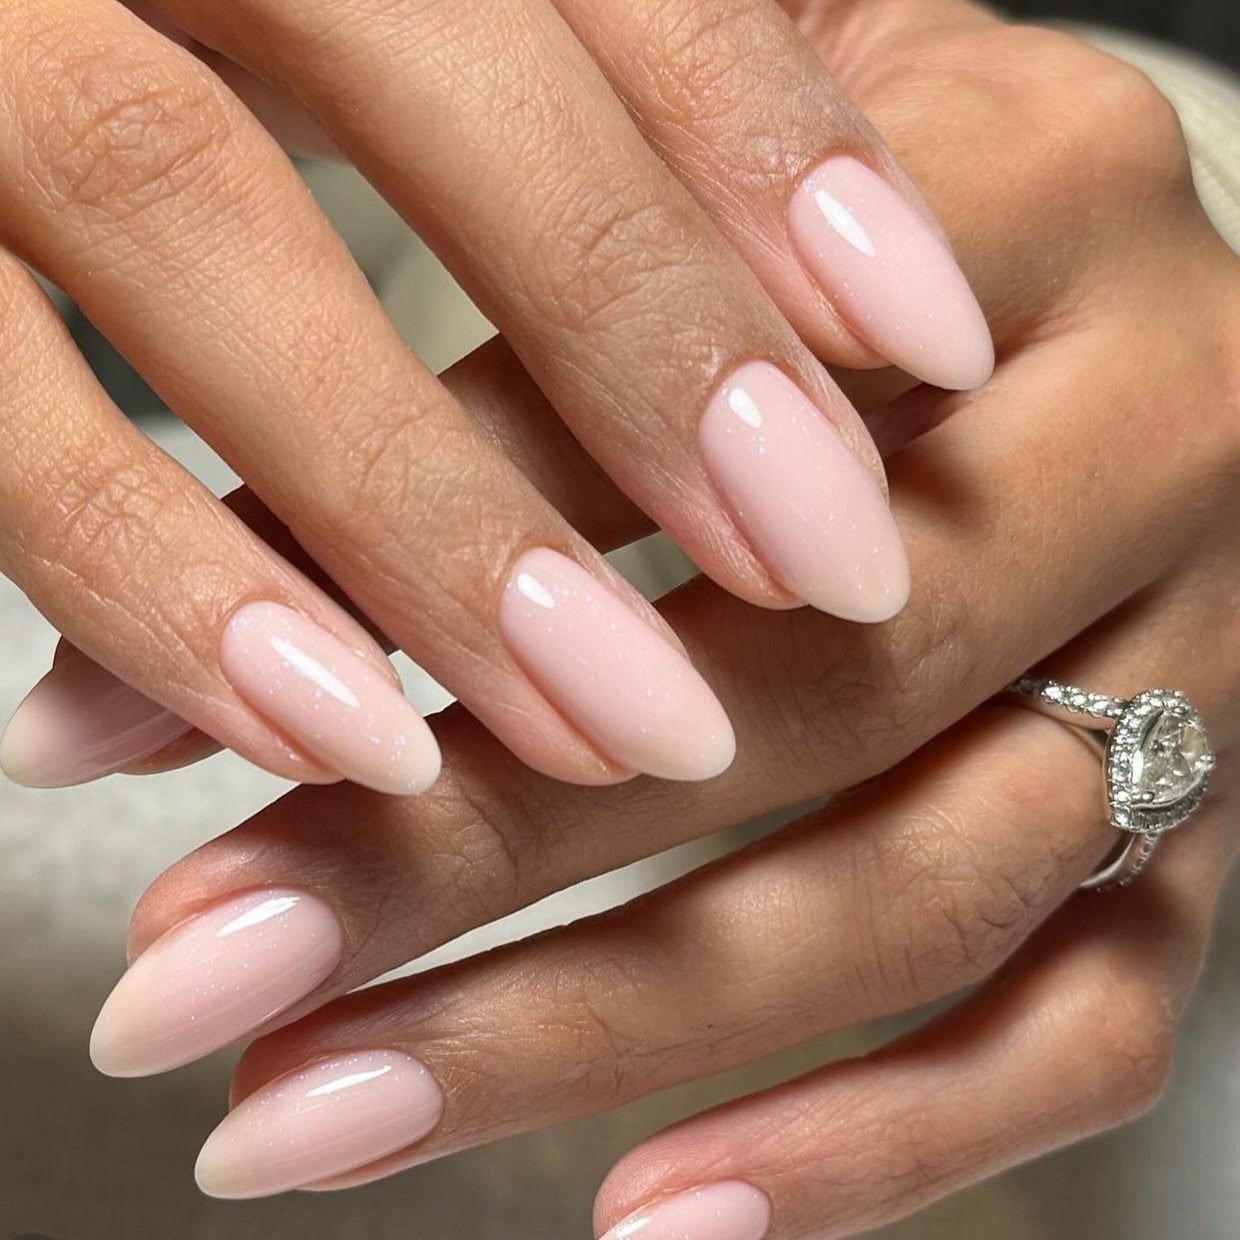 BIAB &bull; most loved 

The main benefit of BIAB (Builder In A Bottle) nails is their versatility and durability. Unlike traditional nail enhancements, BIAB combines the strength of gel with the flexibility of acrylic, resulting in a long-lasting, c